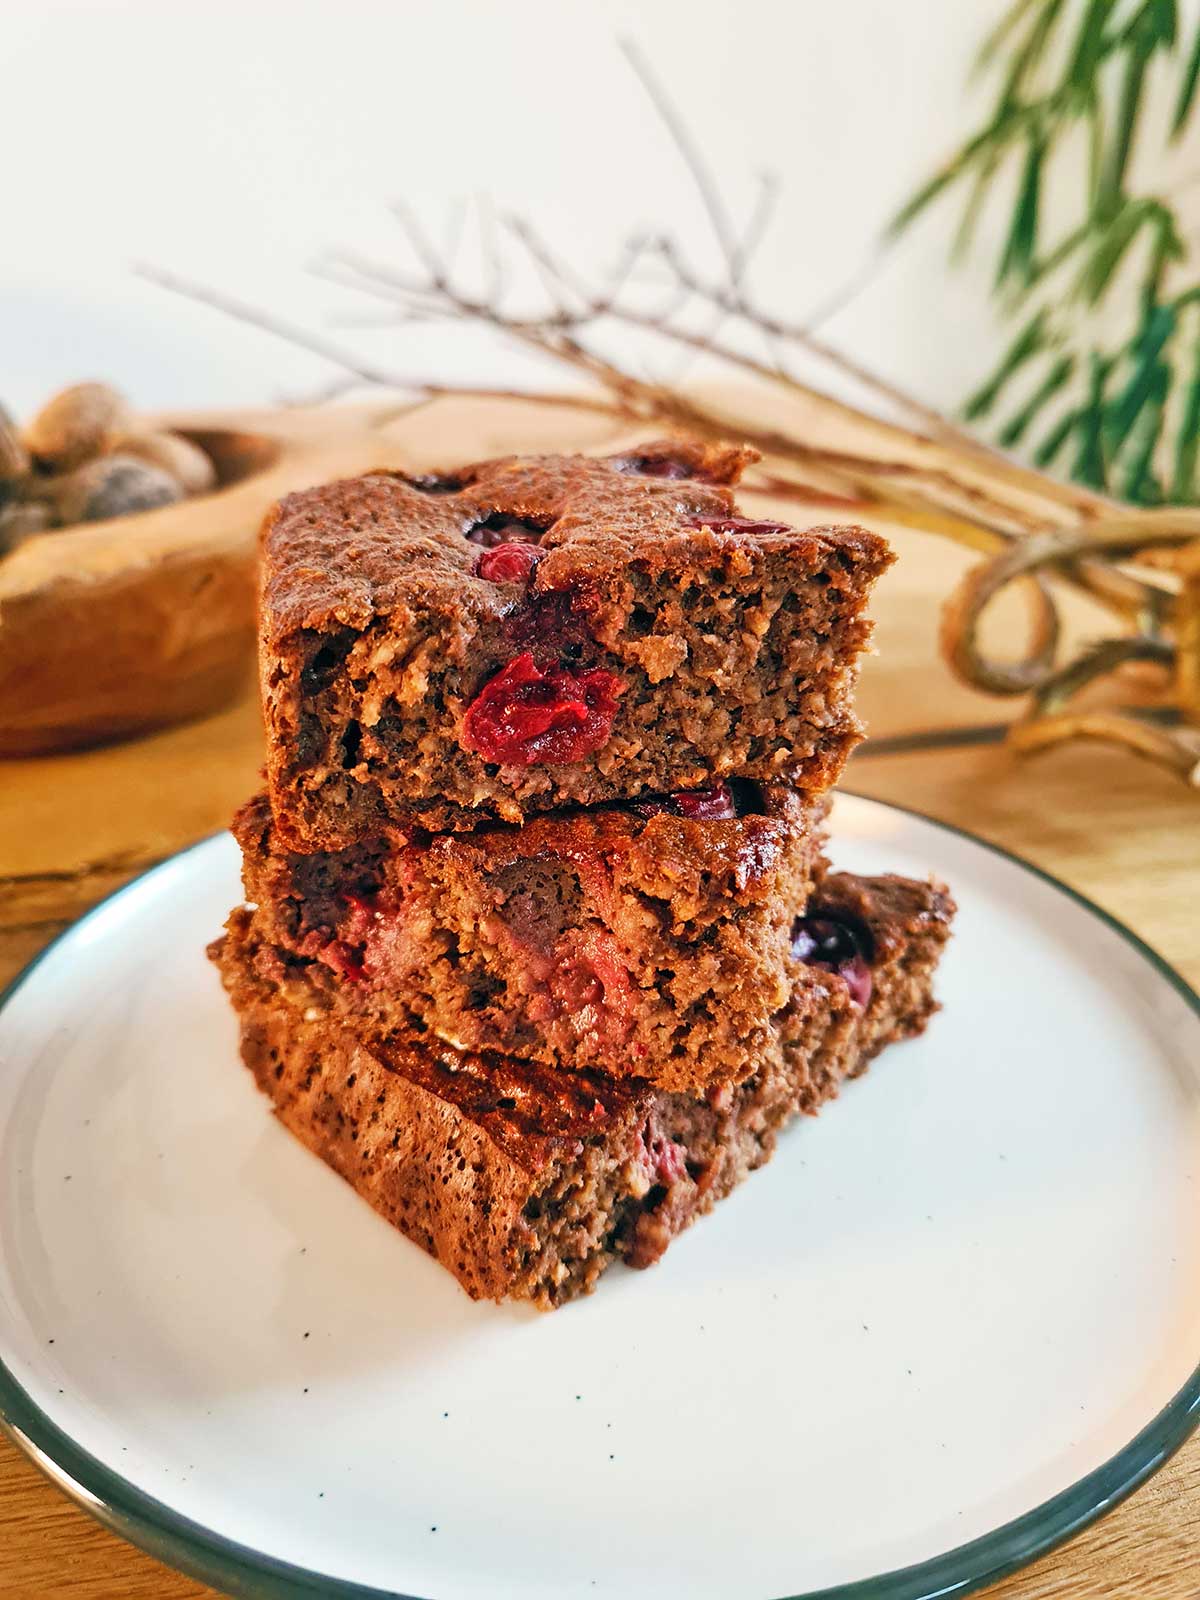 High-Protein Oatmeal Brownie with Sour Cherries recipe serving